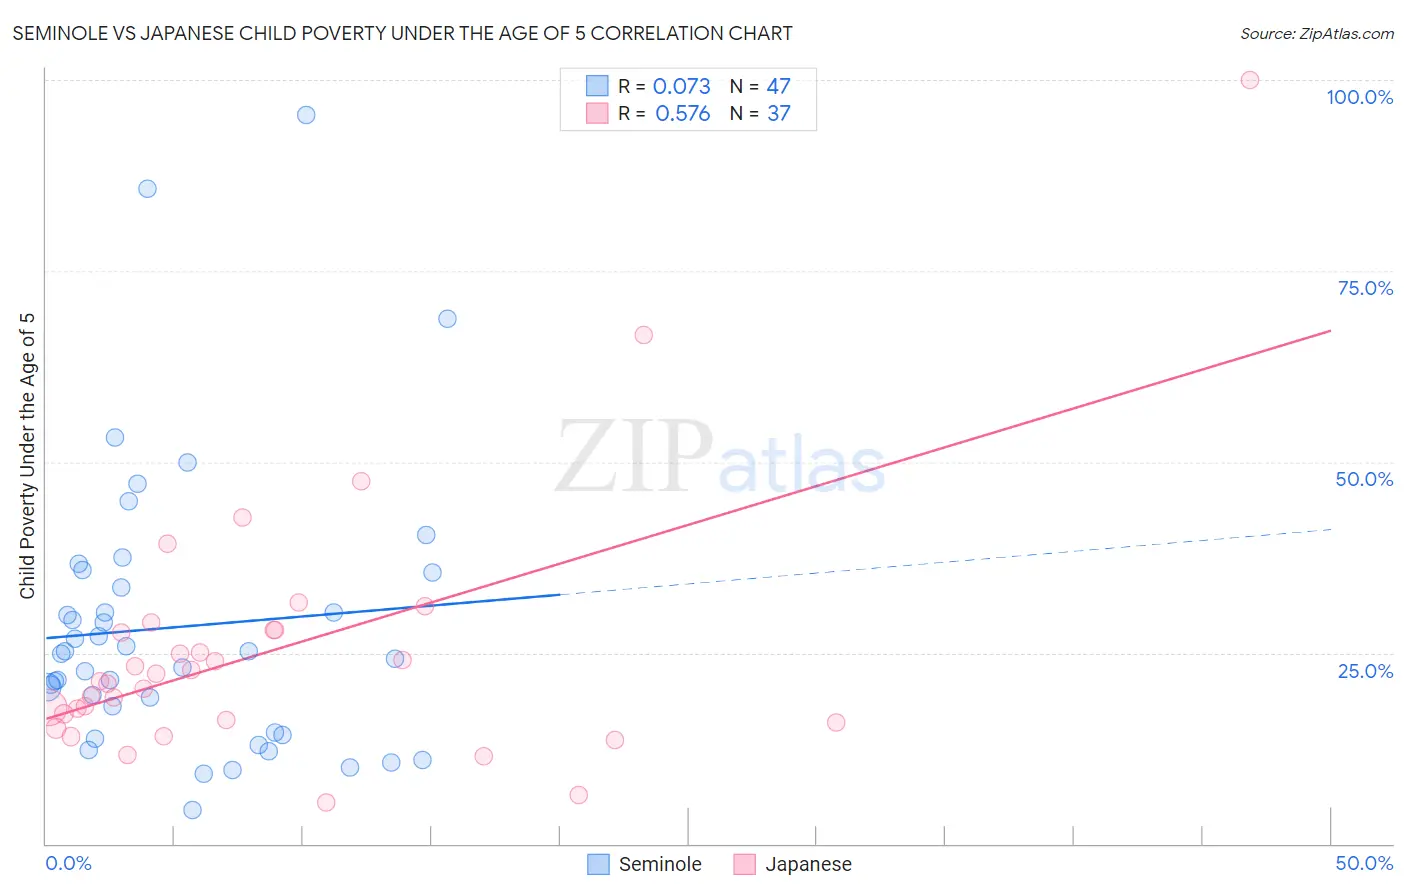 Seminole vs Japanese Child Poverty Under the Age of 5